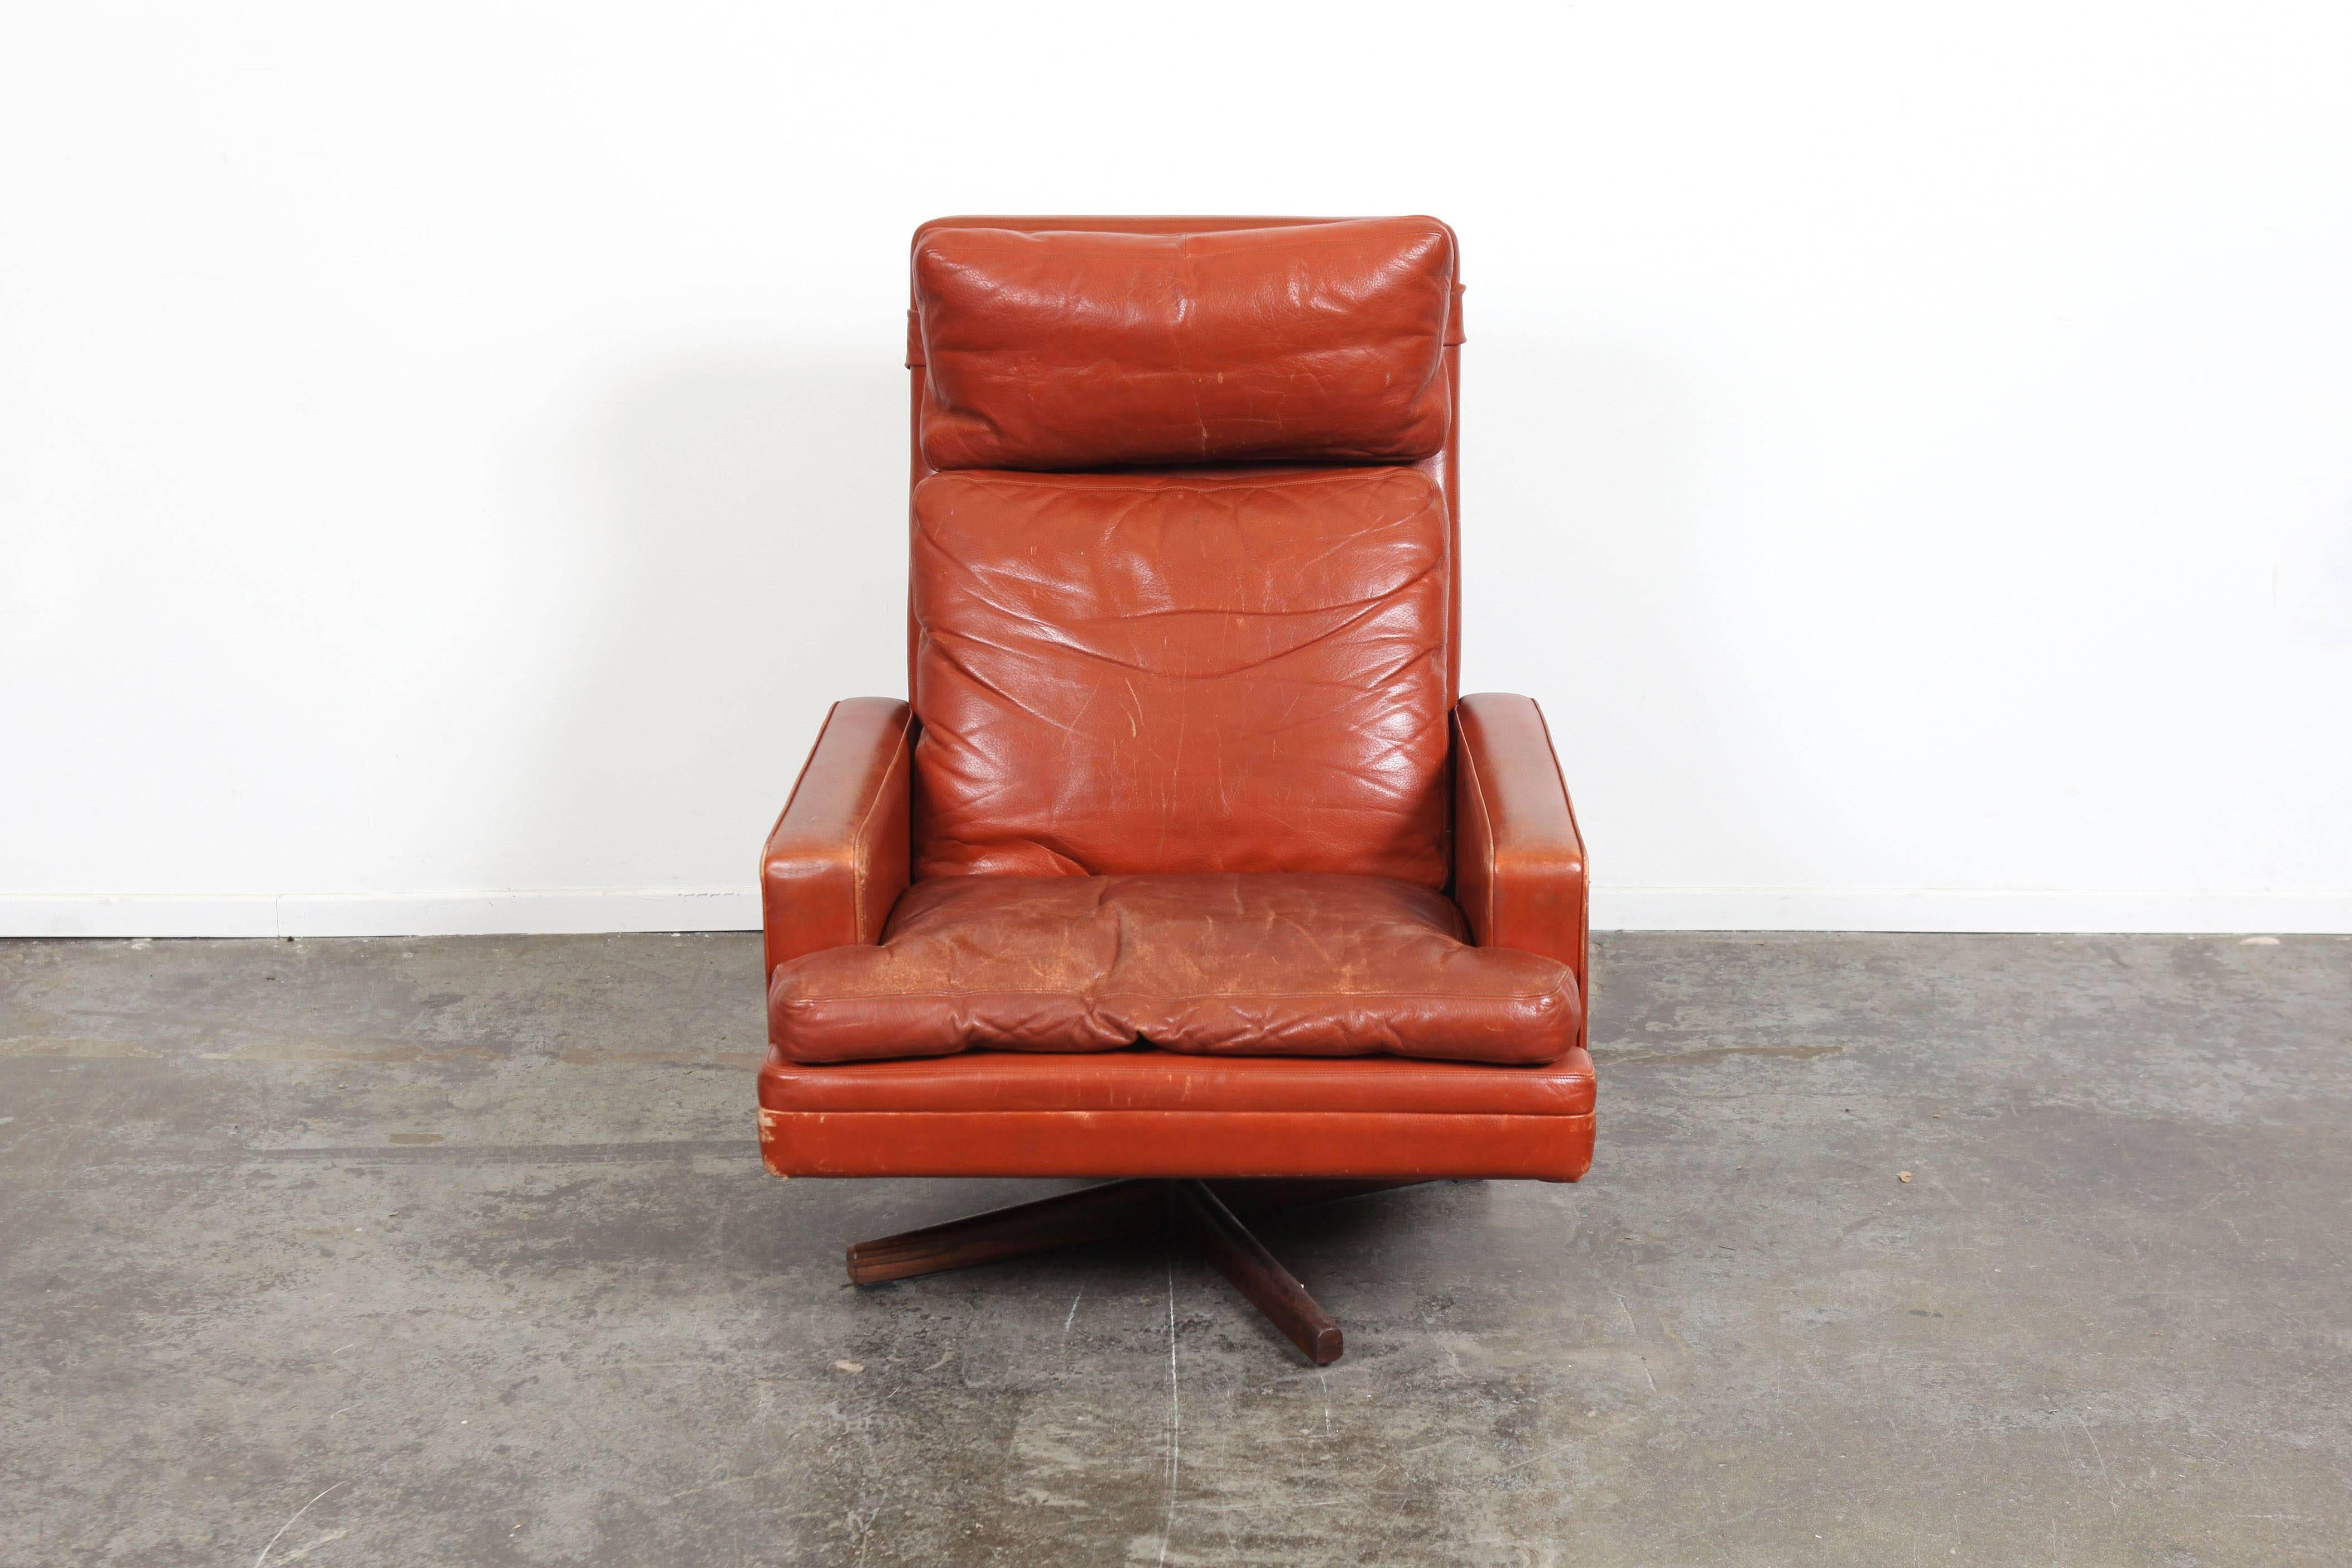 Norwegian Mid-Century Modern leather swivel chair designed by Fredrik Kayser and produced by Vatne Mobler, 1960s, nice patina/wear on the leather with rosewood and metal base.

